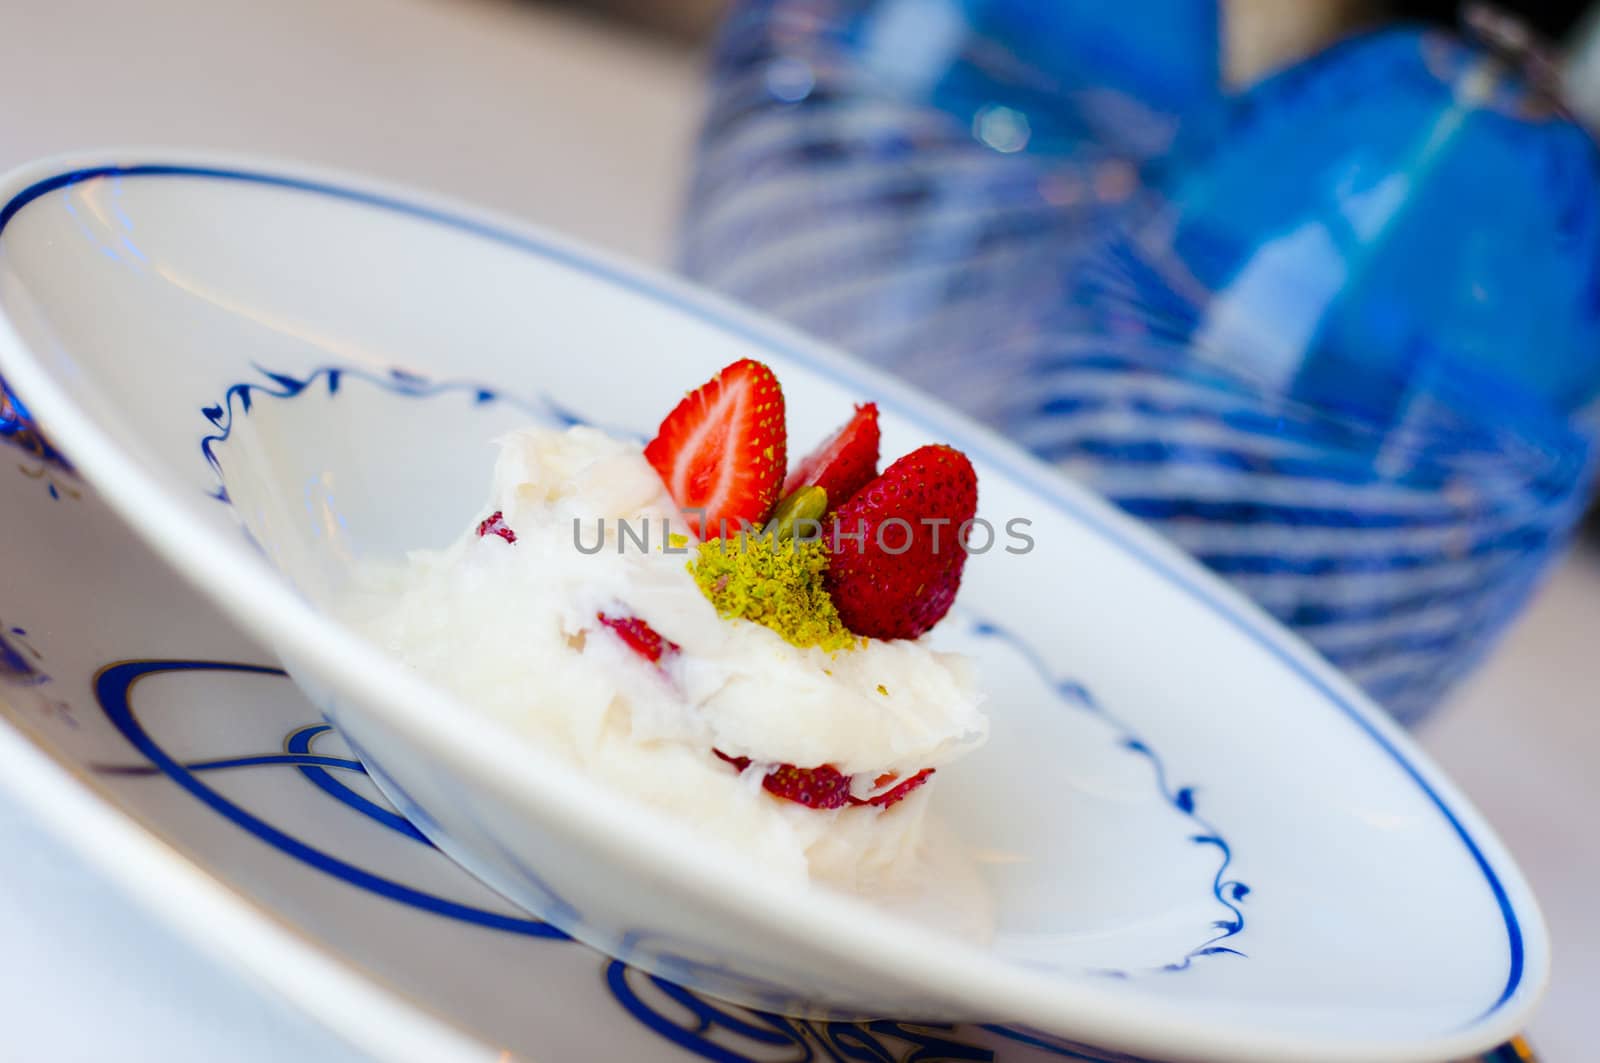 Gullac or Güllaç, a traditional Turkish-Ottoman milky dessert made with thin dough layers and rose extract